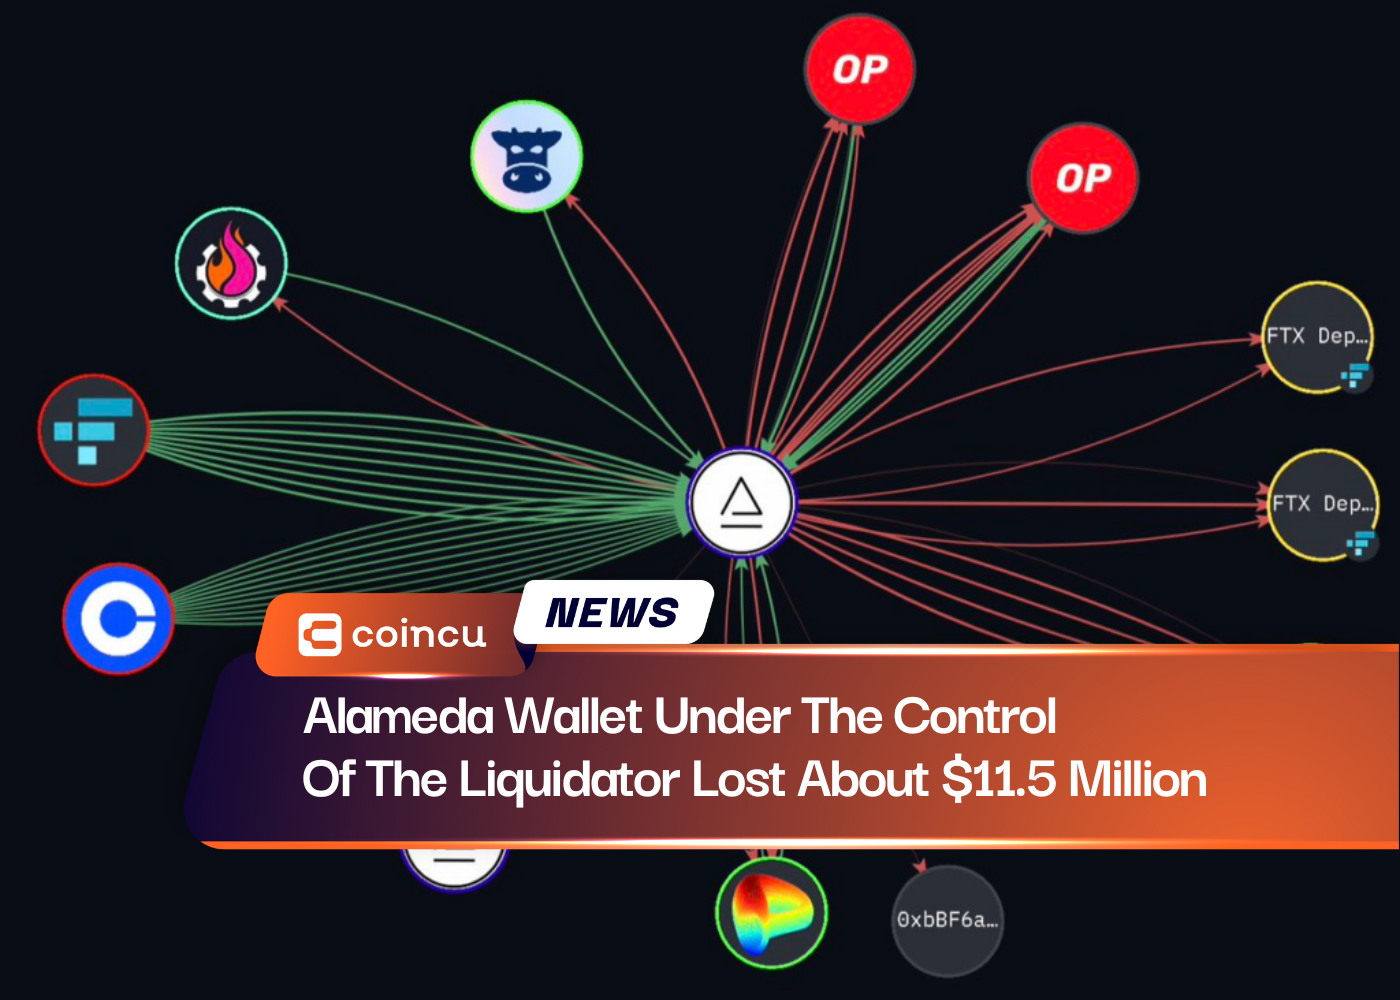 Alameda Wallet Under The Control Of The Liquidator Lost About $11.5 Million